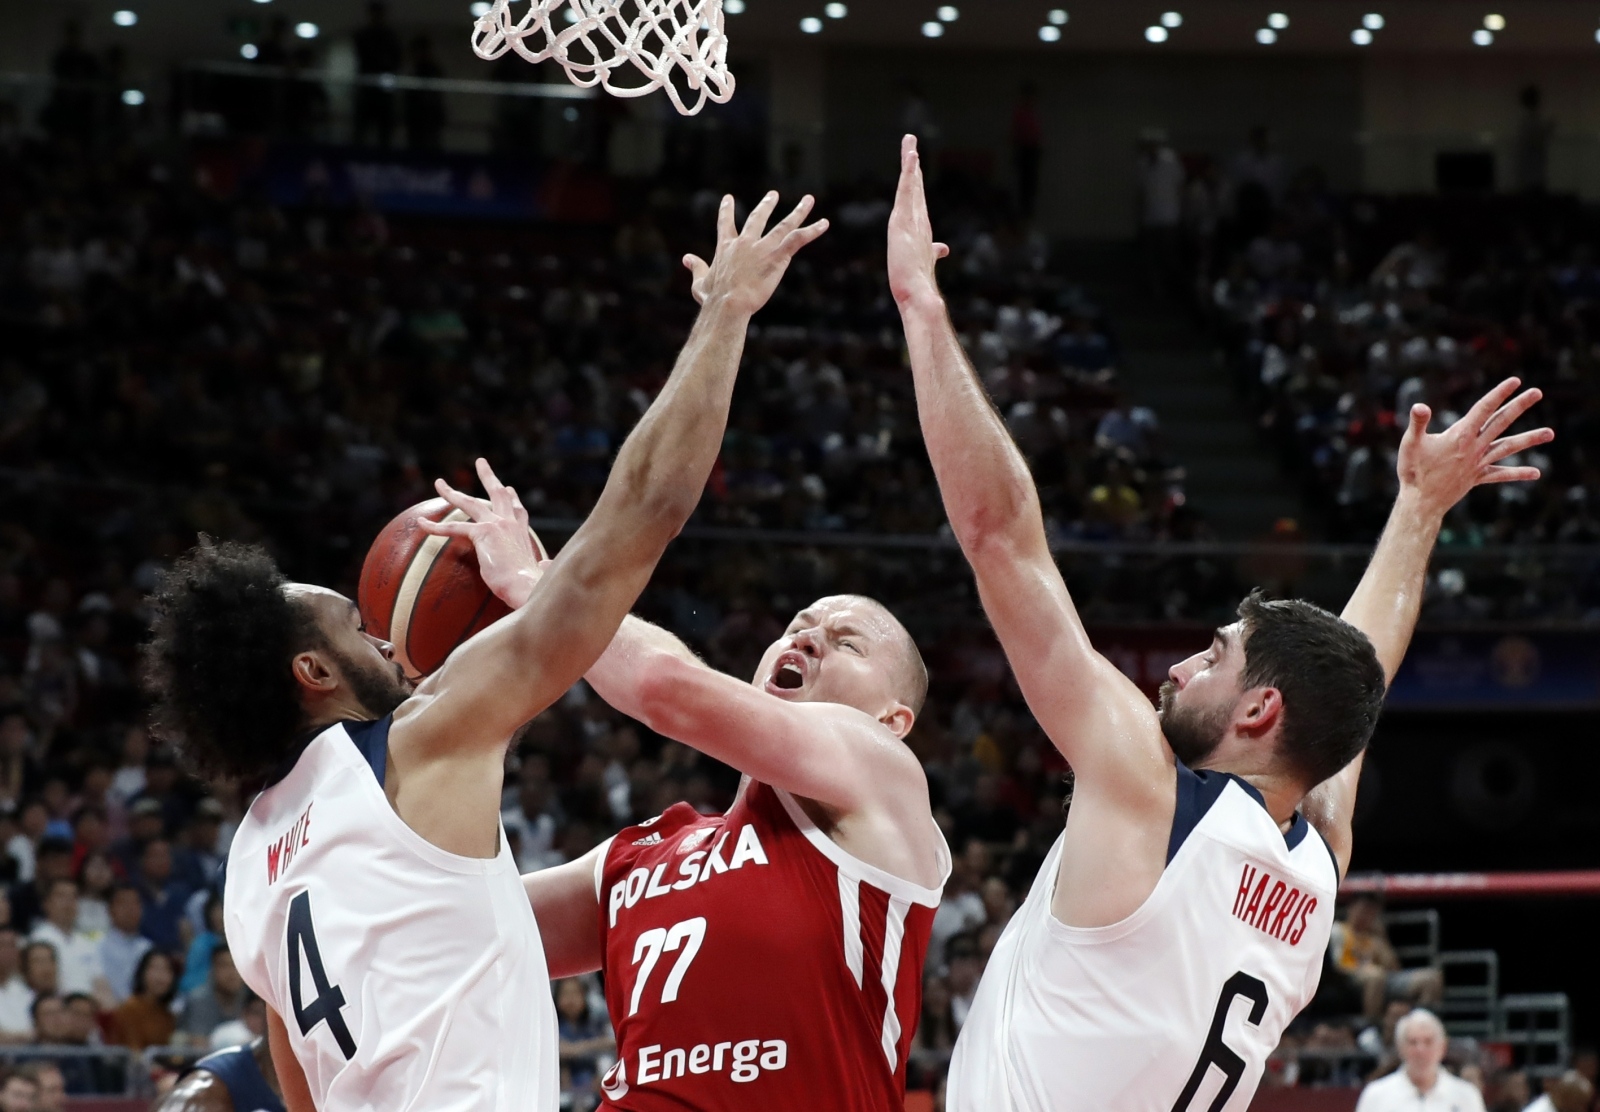 Basketball - FIBA World Cup - Classification Games 7-8 - United States v Poland Basketball - FIBA World Cup - Classification Games 7-8 - United States v Poland - Wukesong Sport Arena, Beijing, China - September 14, 2019  Poland's Damian Kulig in action with Derrick White and Joe Harris of the U.S. REUTERS/Kim Kyung-Hoon KIM KYUNG-HOON